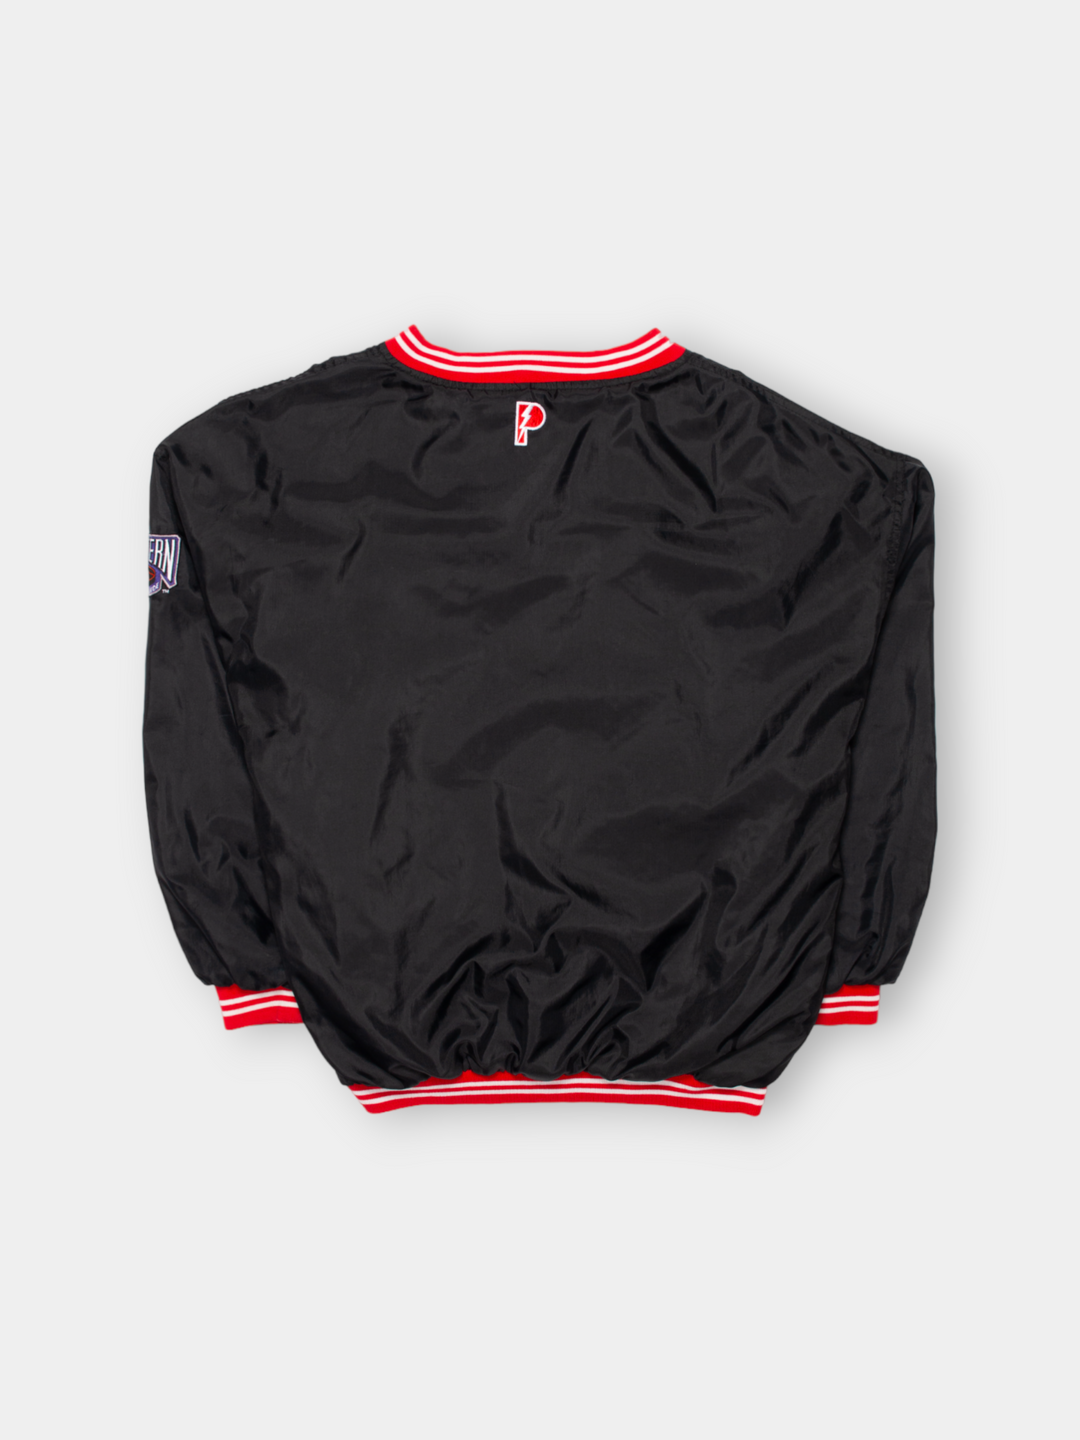 80s Red Wings Windbreaker Pull Over (L)